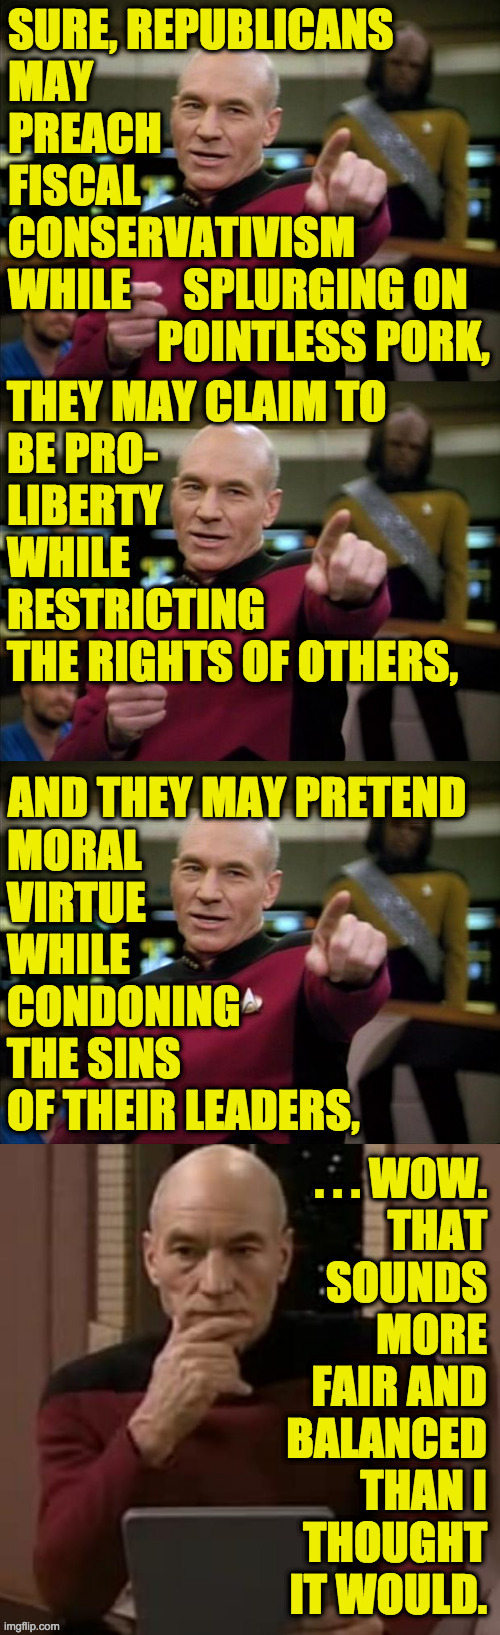 I'm posting it anyway!  ( : | AND THEY MAY PRETEND | image tagged in memes,picard,republicans,fair and balanced,hypocrisy,true story | made w/ Imgflip meme maker